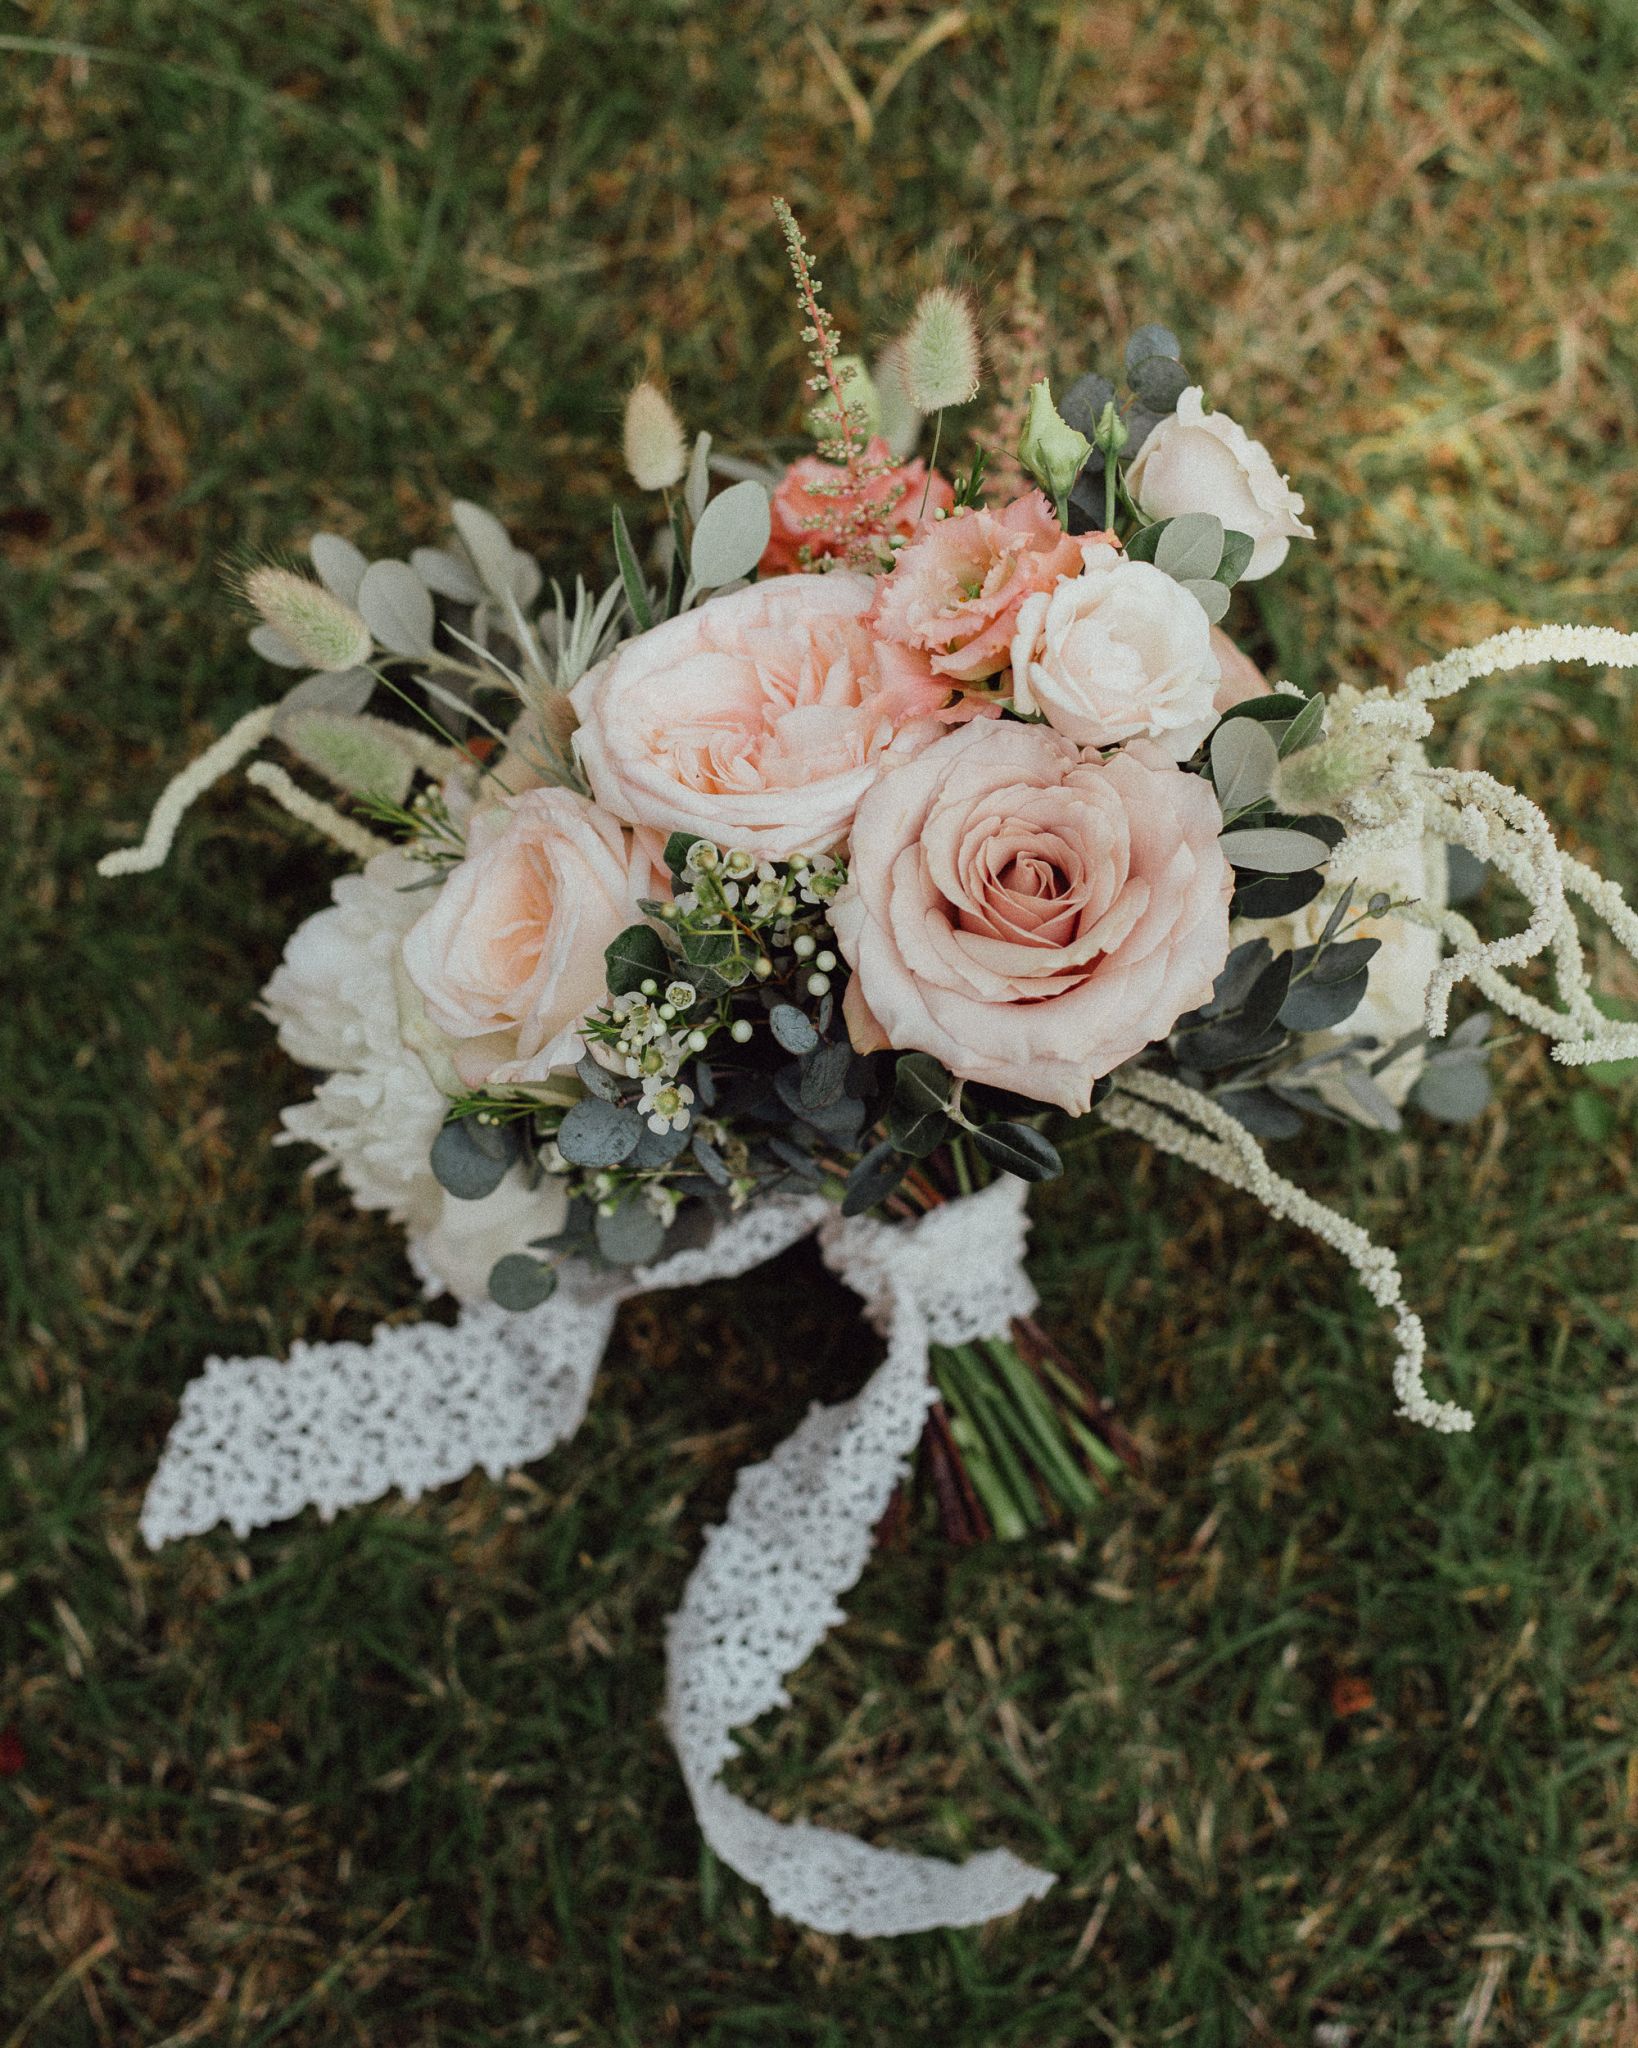 01 Peach wedding bouquet with lace ribbon